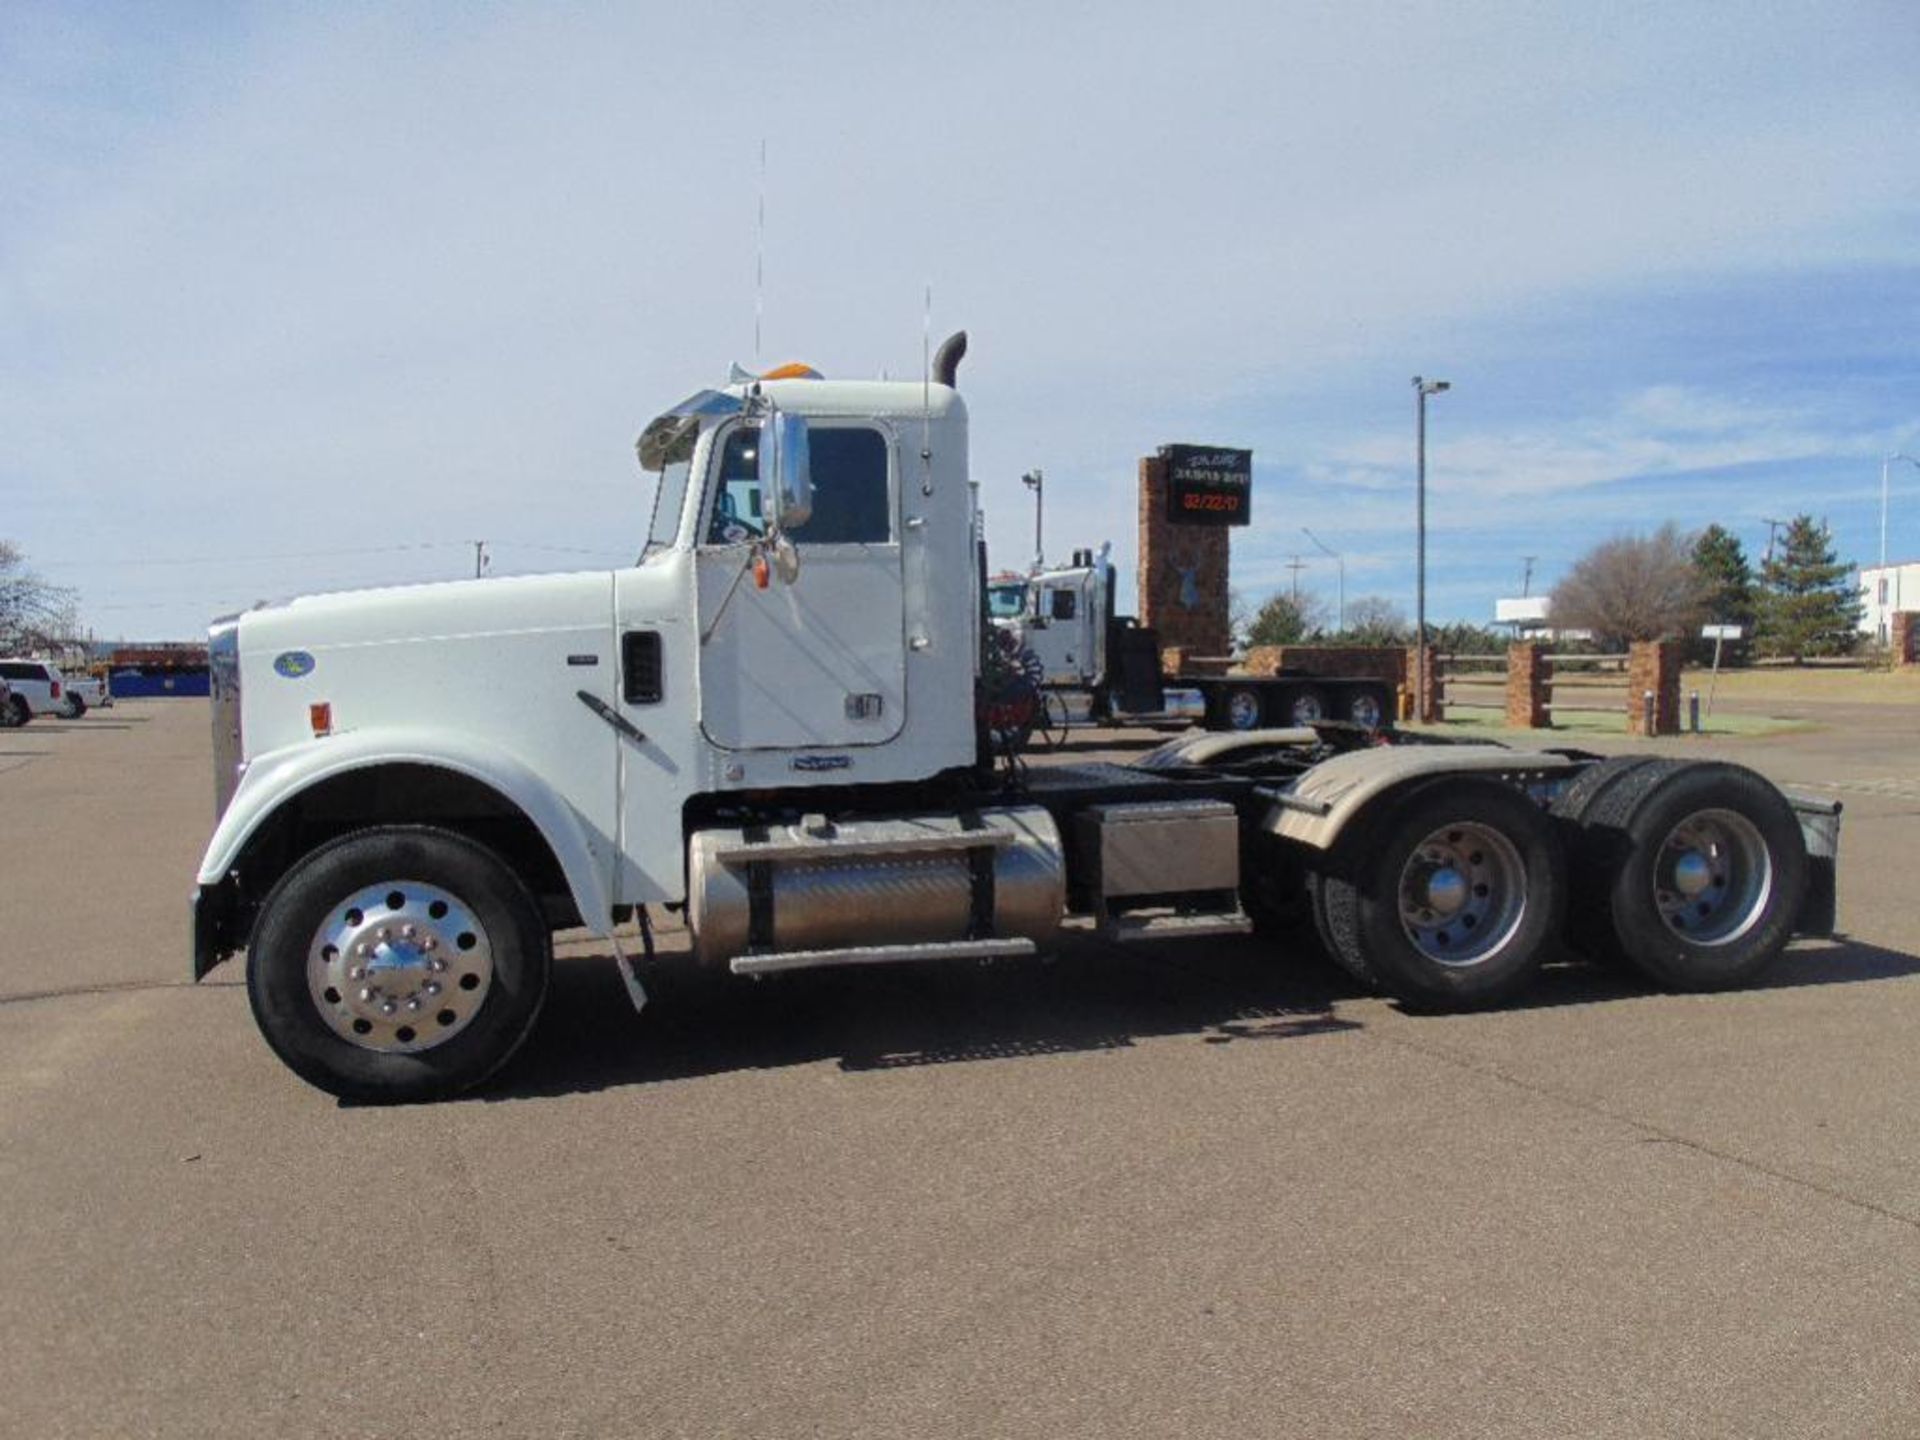 2009 Freightliner FLD120SD t/a Truck Tractor s/n 1fujalcv39dak0142, mercedes eng,10 spd trans,a/r - Image 2 of 3